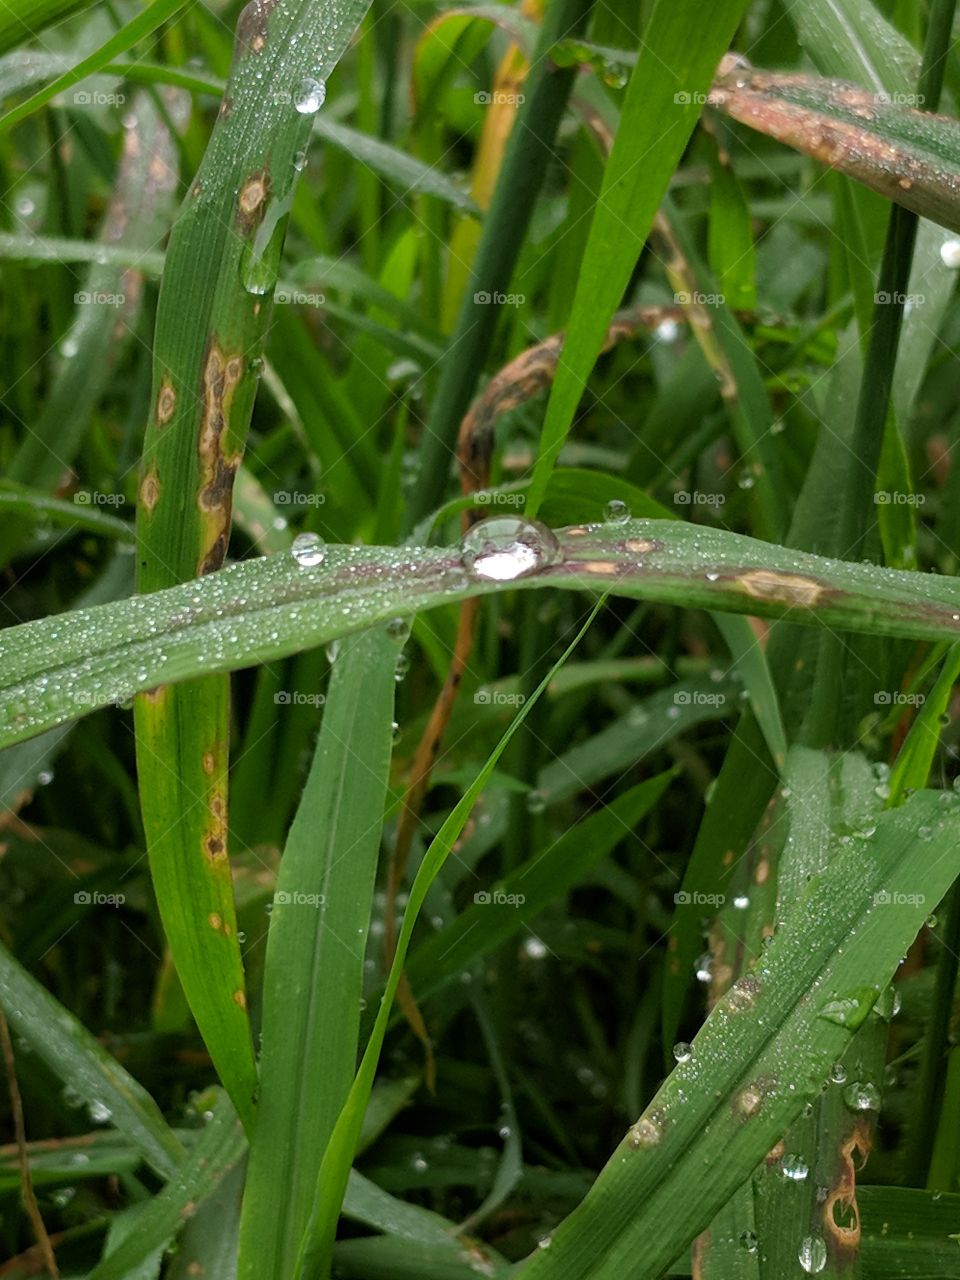 Drops of dew on grass